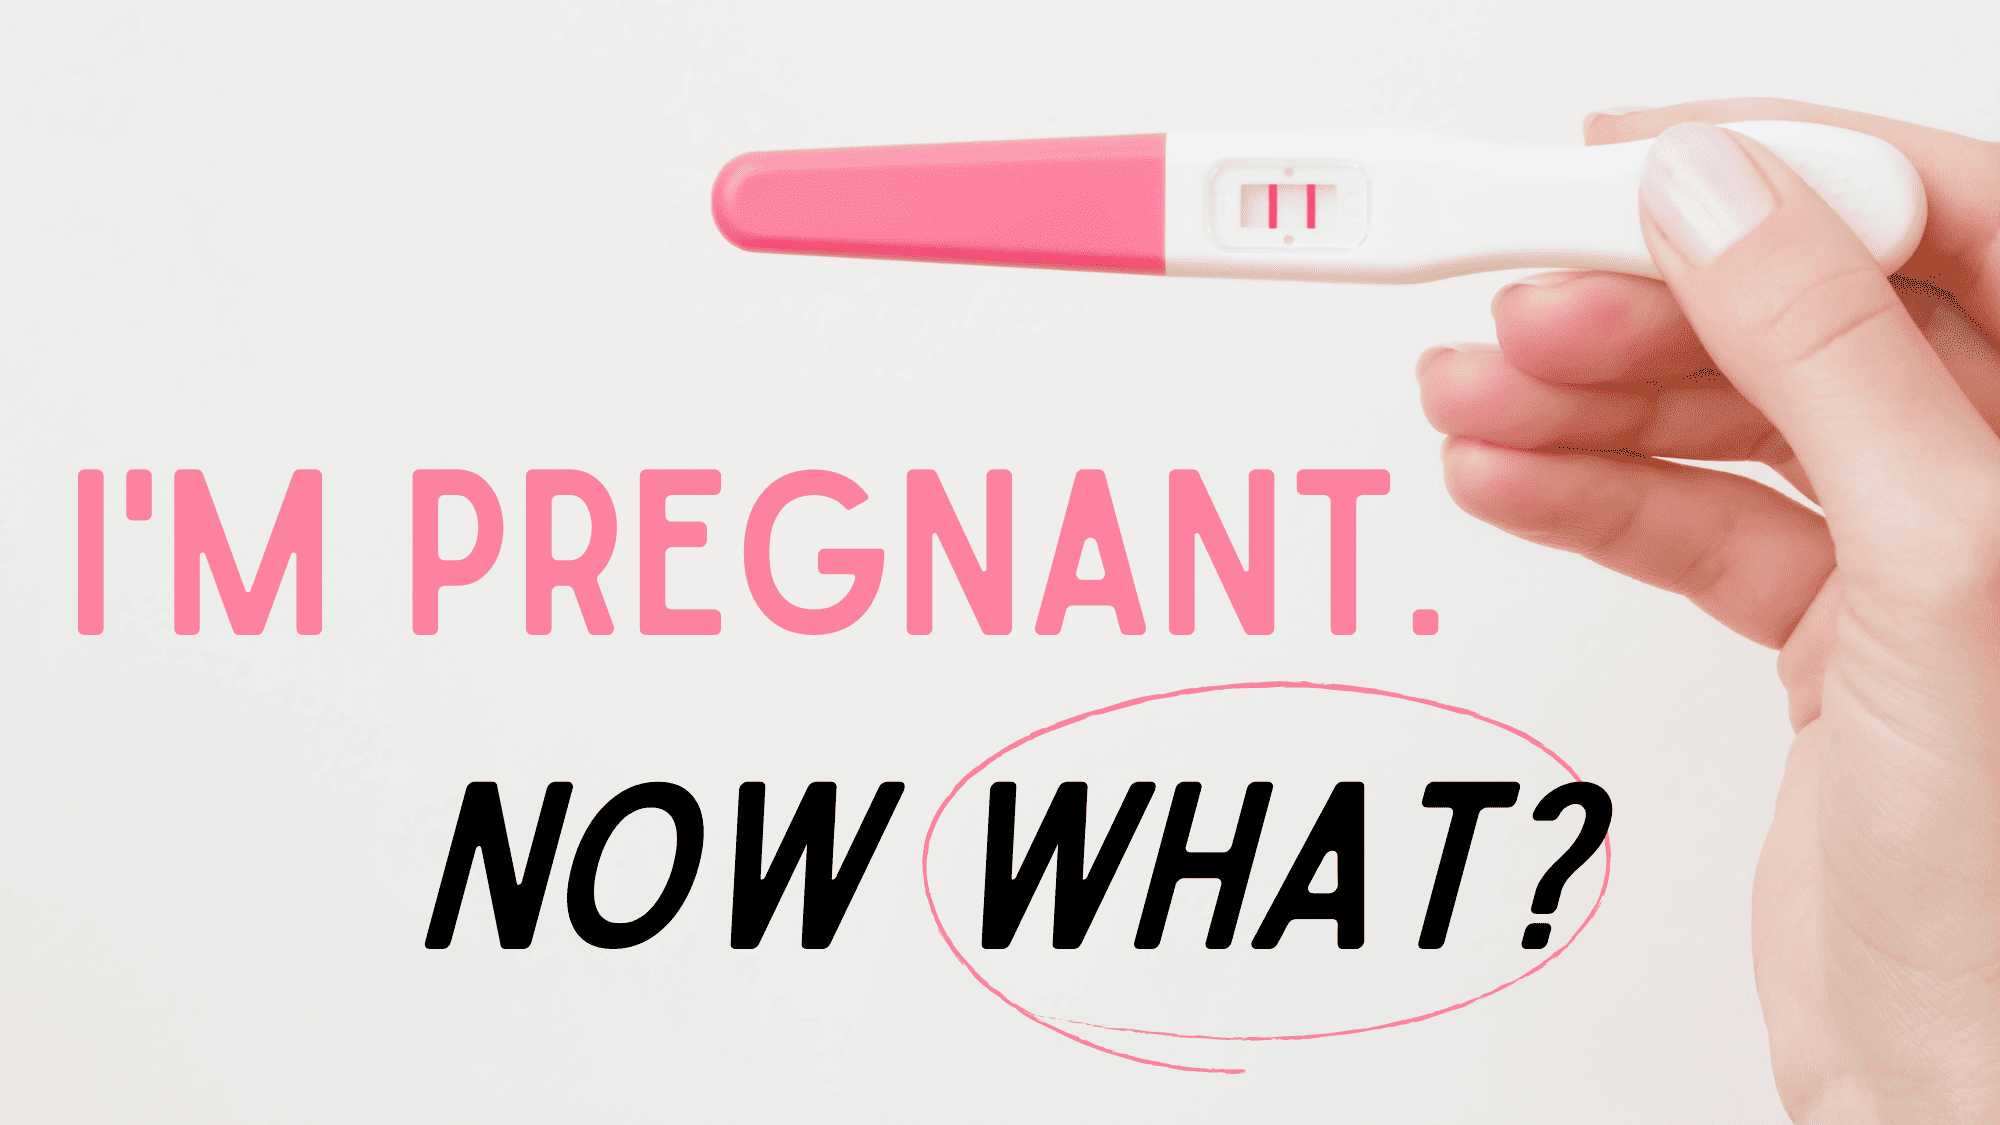 Image of woman holding pregnancy test thinking, "I'm Pregnant, Now What?"